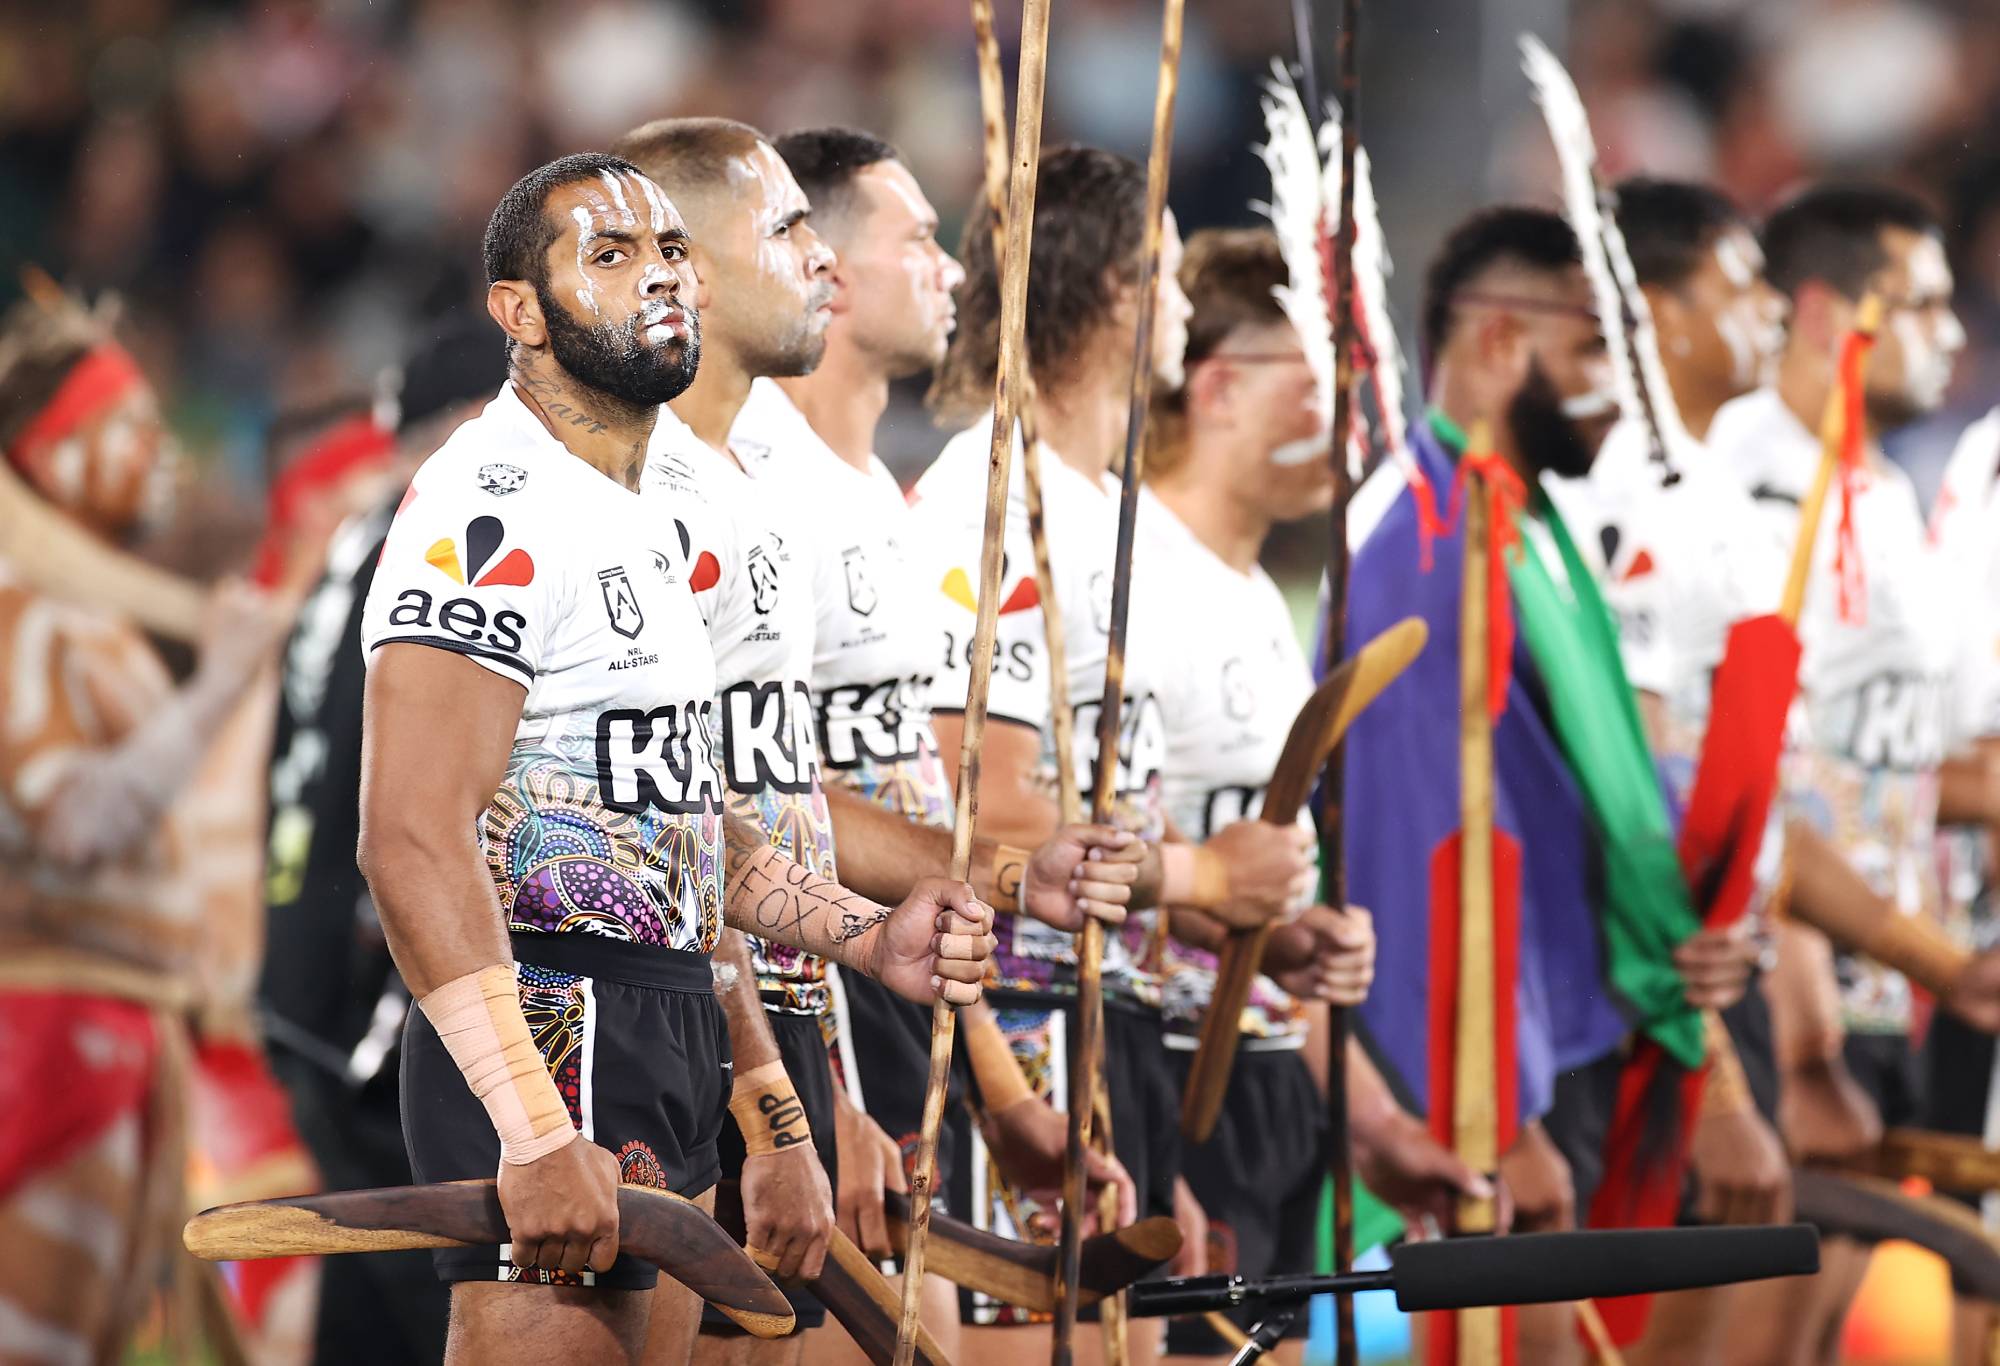 SYDNEY, AUSTRALIA - FEBRUARY 12: Josh Addo-Carr of the Indigenous All Stars waits as he and his team prepare to perform  the war cry during the pre-match ceremony before the match between the Men's Indigenous All Stars and the Men's Maori All Stars at CommBank Stadium on February 12, 2022 in Sydney, Australia. (Photo by Mark Kolbe/Getty Images)